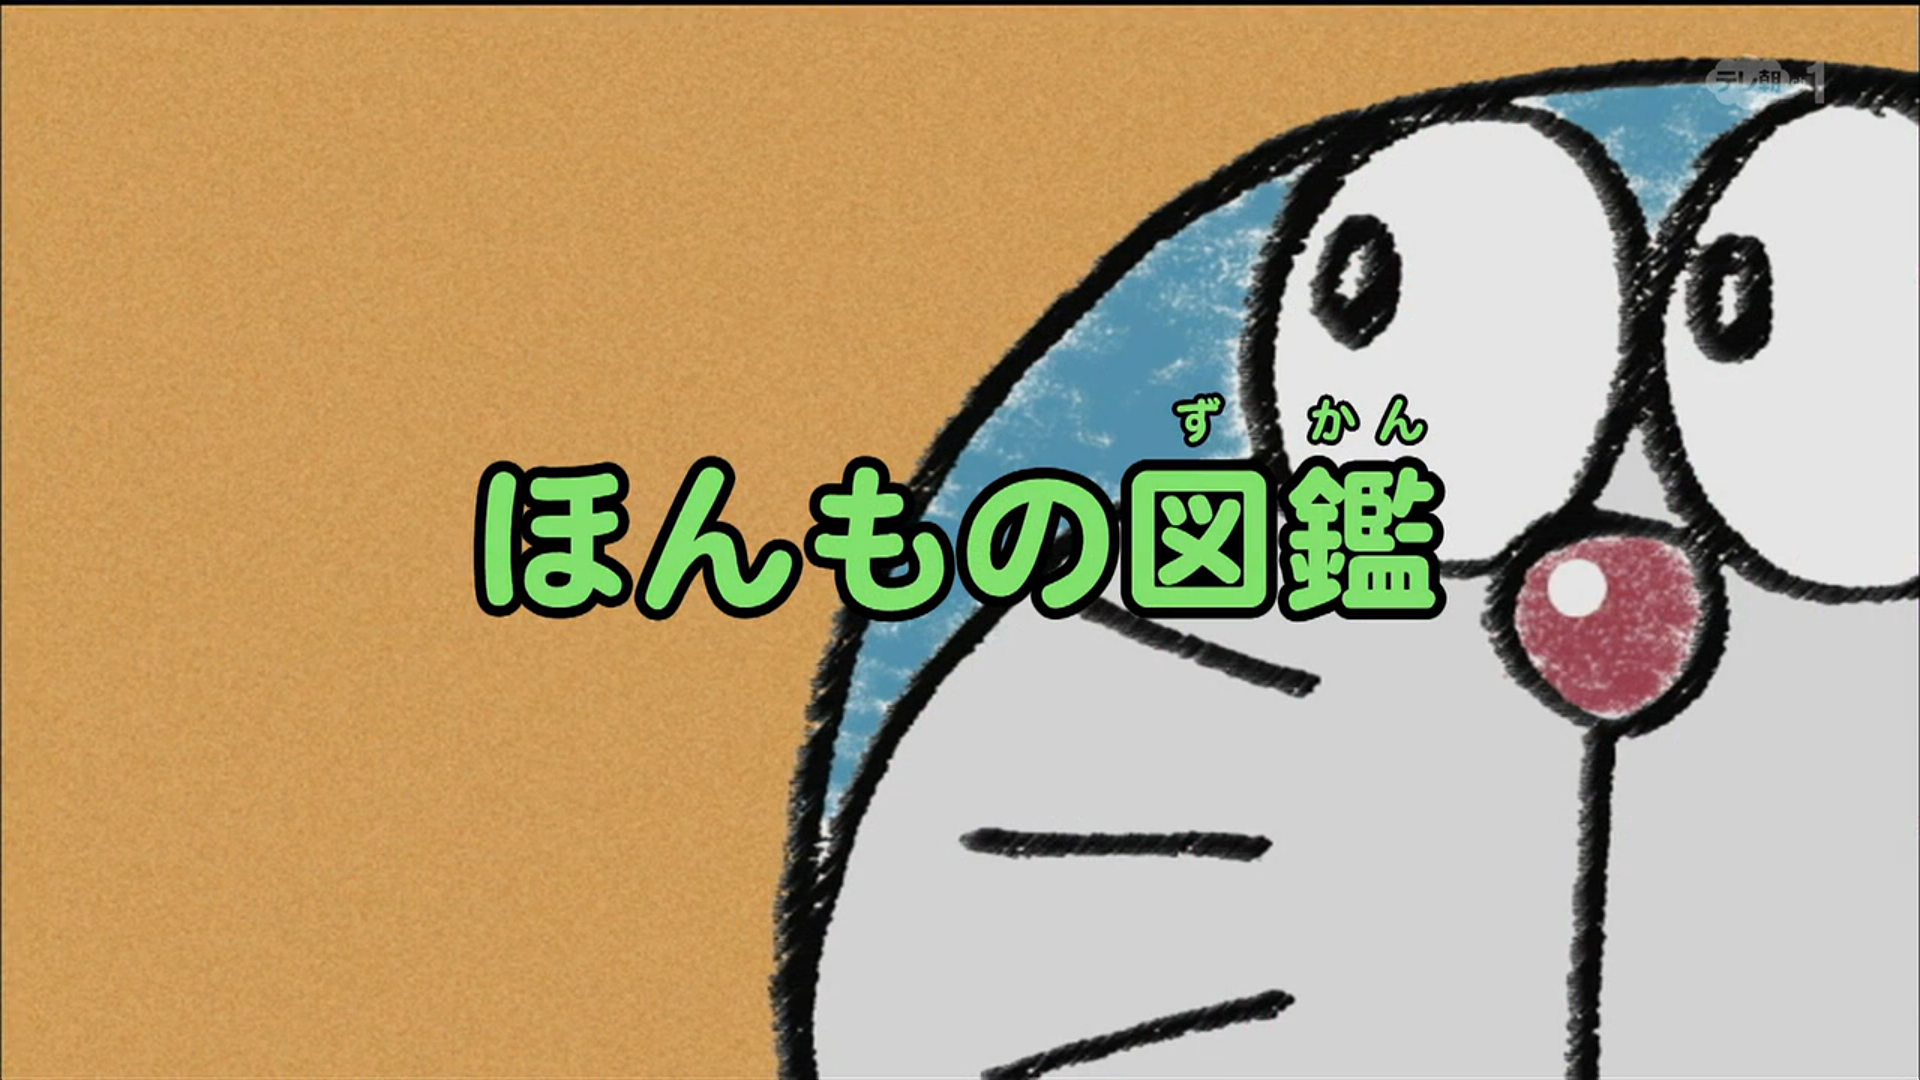 The Illustrated Encyclopedia Of Real Things Doraemon Wiki Fandom